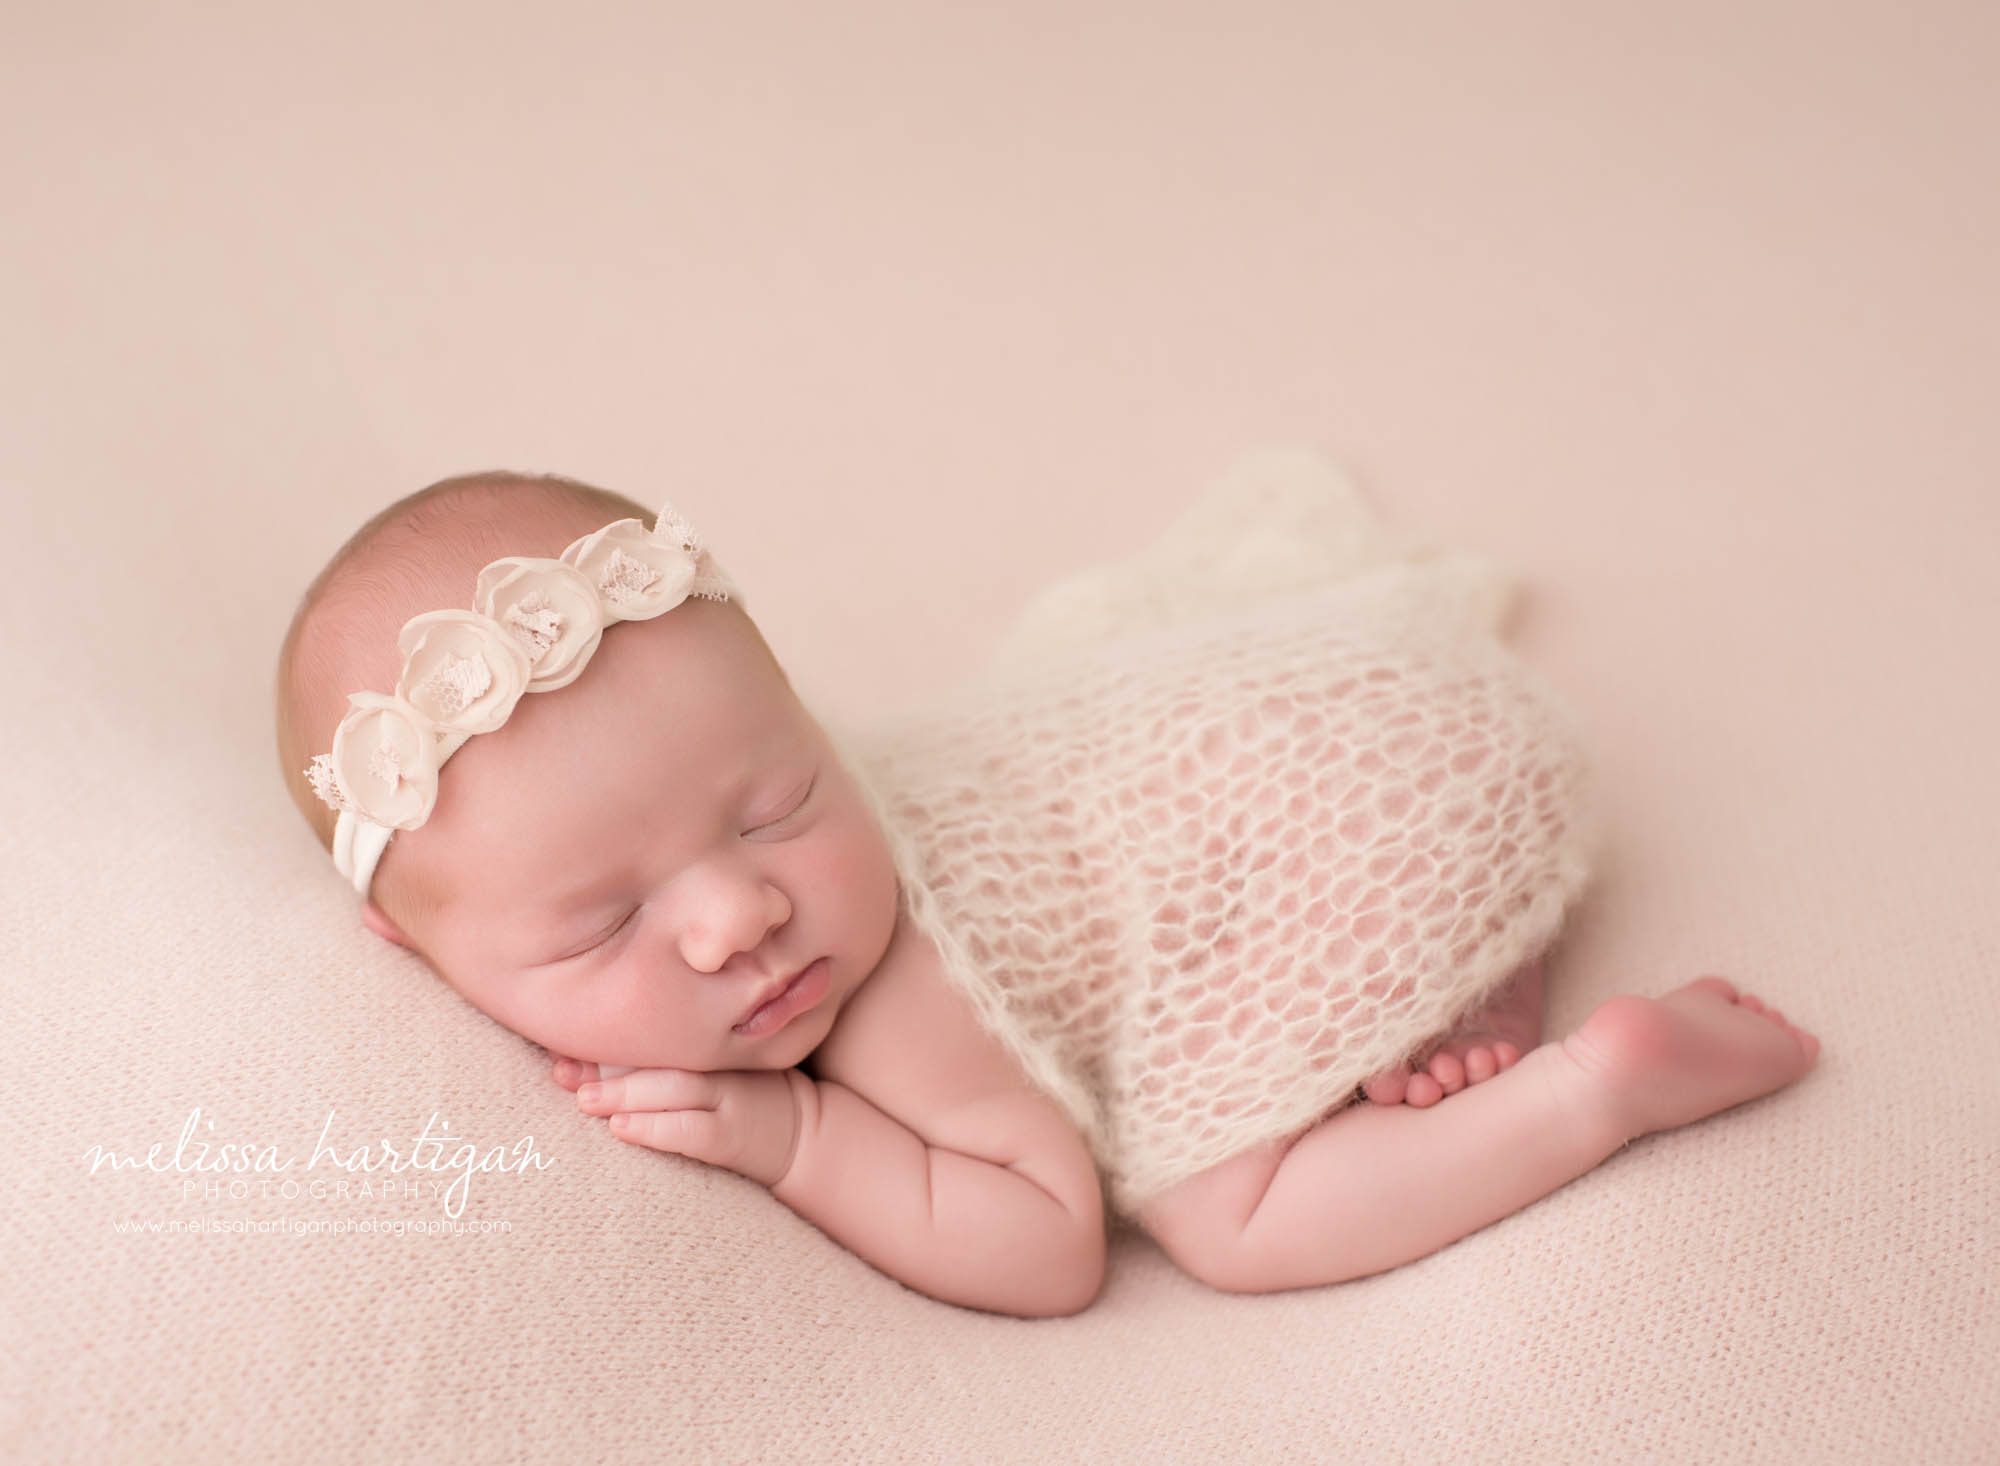 newborn baby girl posed on tummy wearing floral headband with delicate knitted lace wrap draped over her